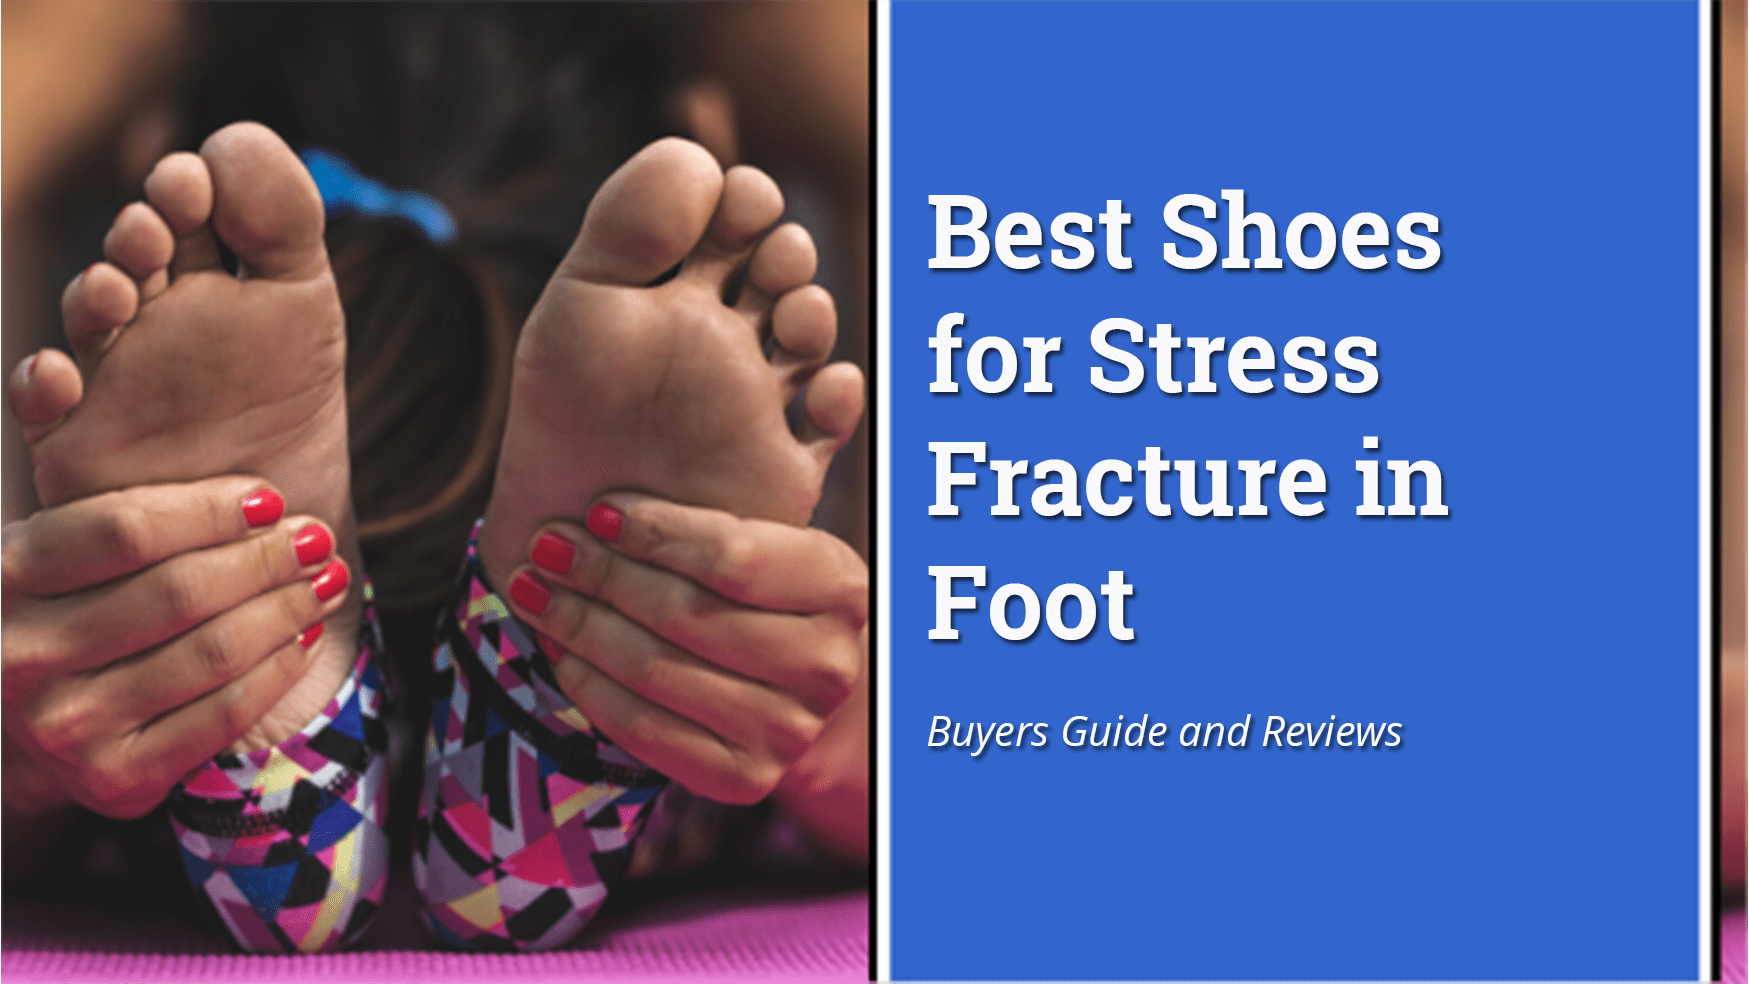 Best Shoes for Stress Fracture in Foot 